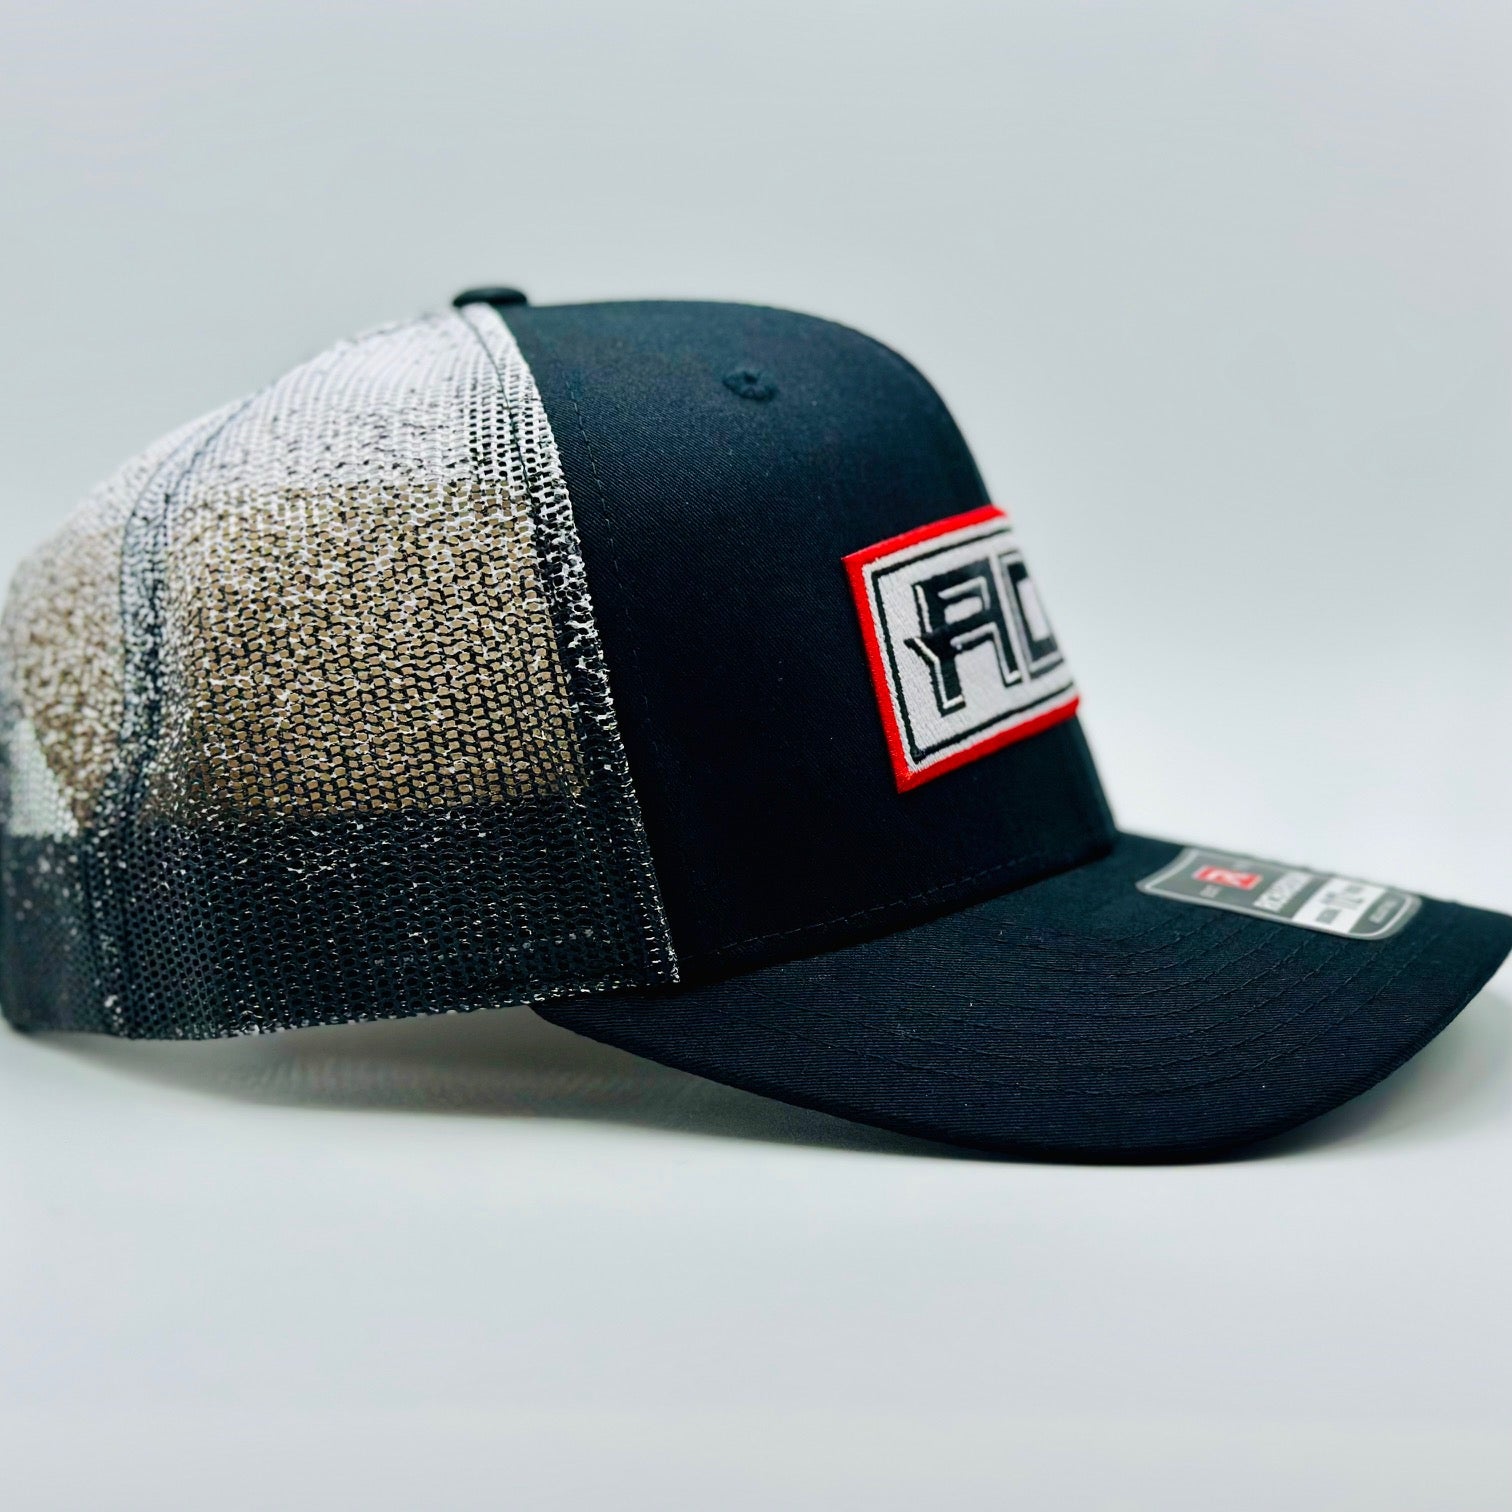 Black/White Fade Hat With Stitched Patch